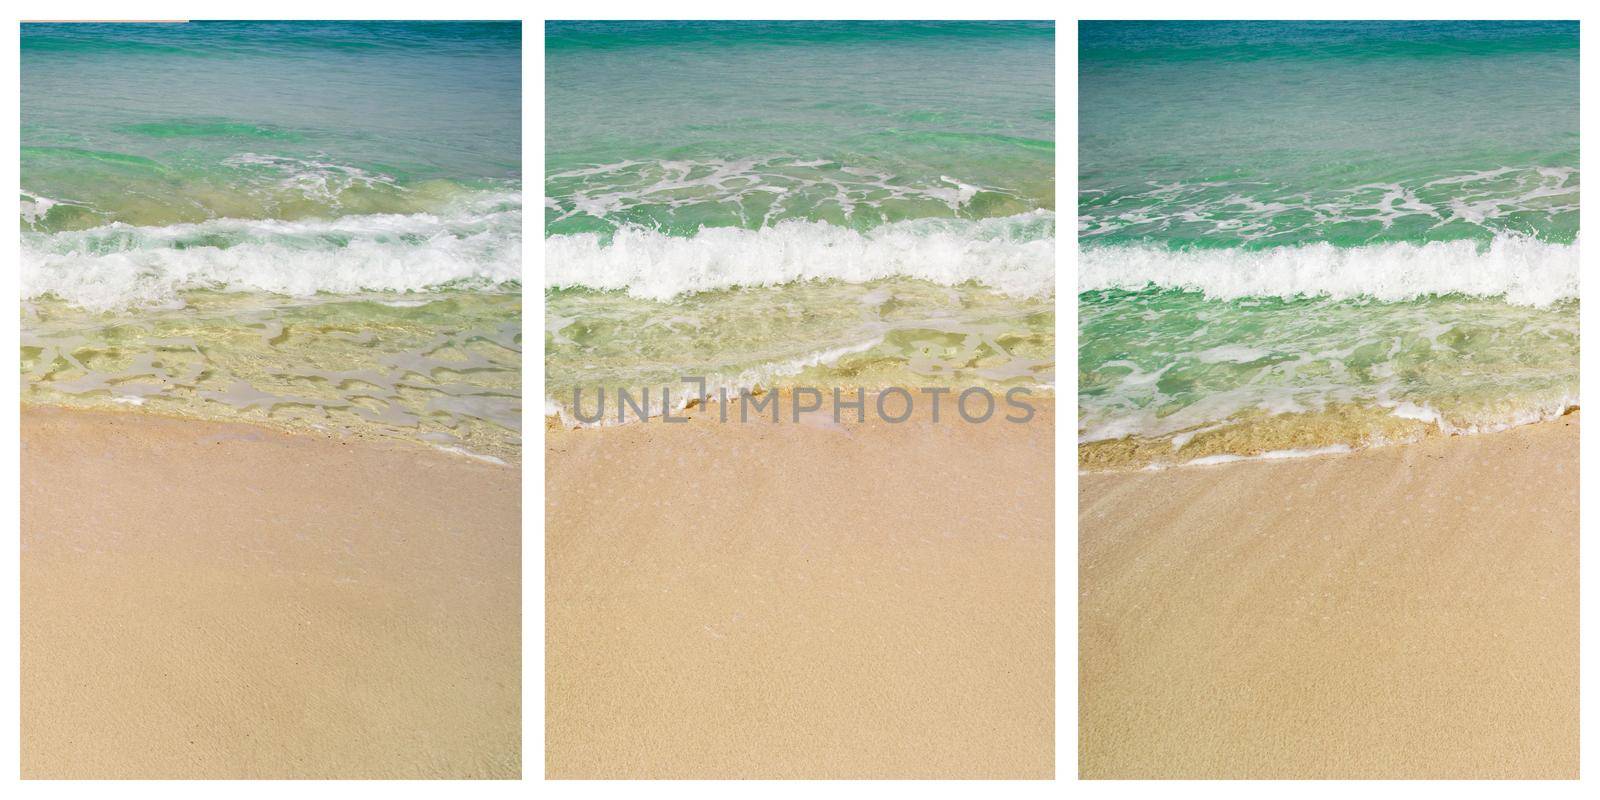 Beatiful sea coast view collage with sand, ocean and waves. Idellyc paradise place pictures set with holiday vibes